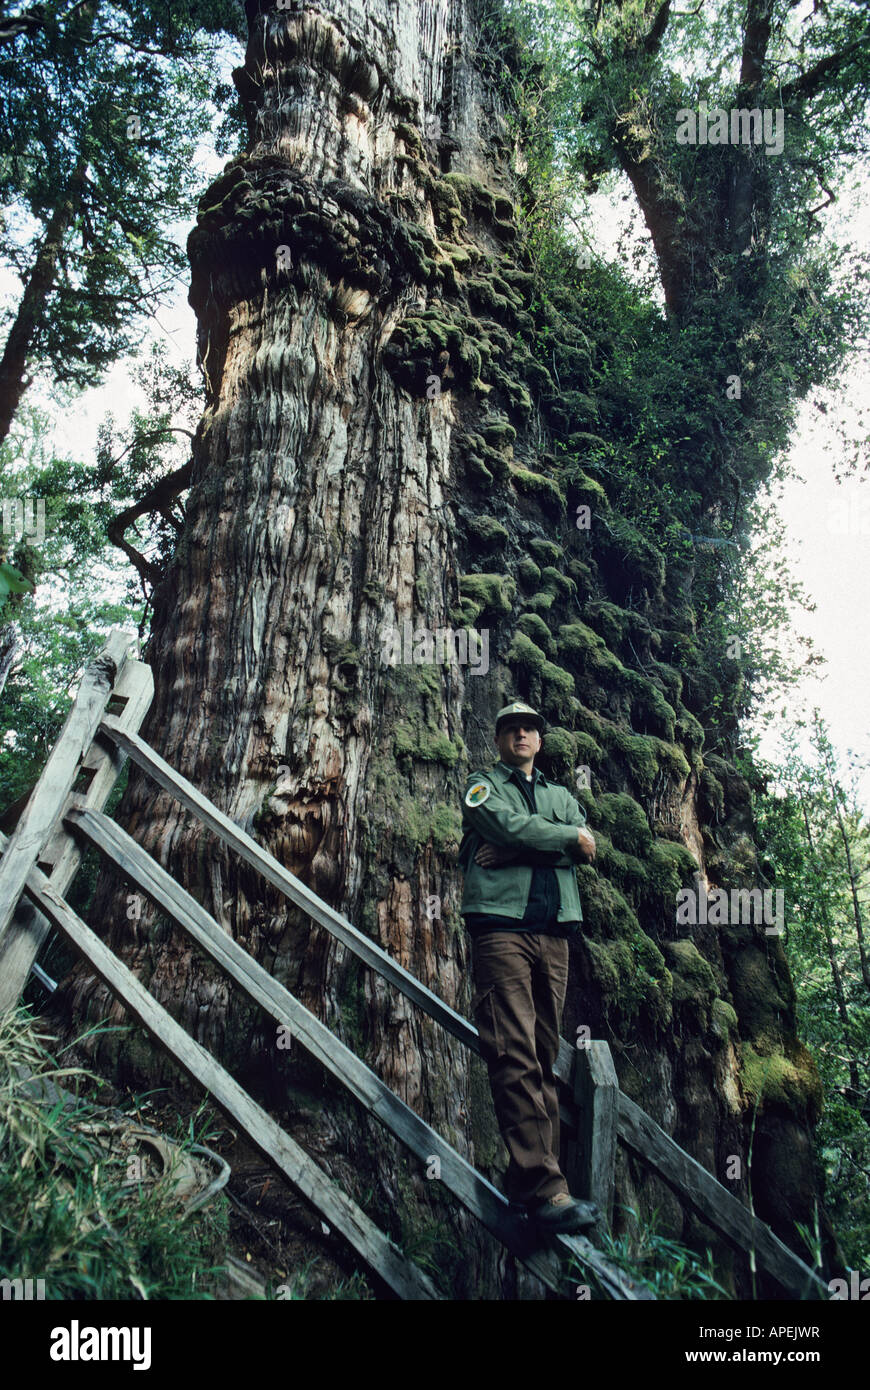 The largest and oldest remaining Alerce tree, Fitzroya cupressoides, (over 3000 years old) with guard in Valdivia Chile Stock Photo